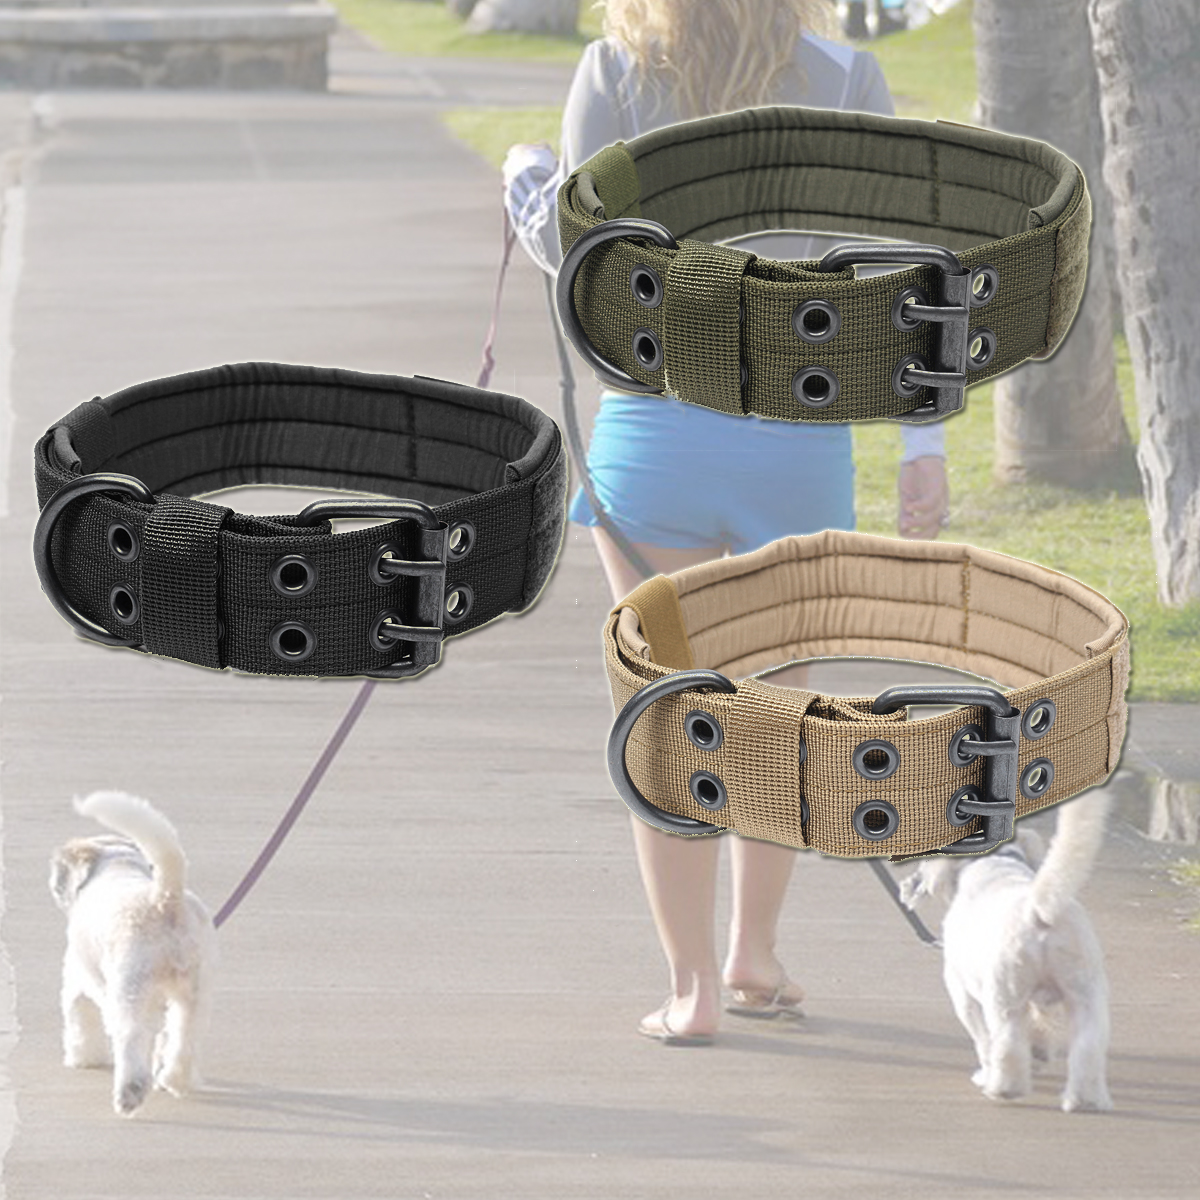 Adjustable-Training-Dog-Collar-Nylon-Tactical-Dog-Collar-Military-With-Metal-D-Ring-Buckle-1366535-1